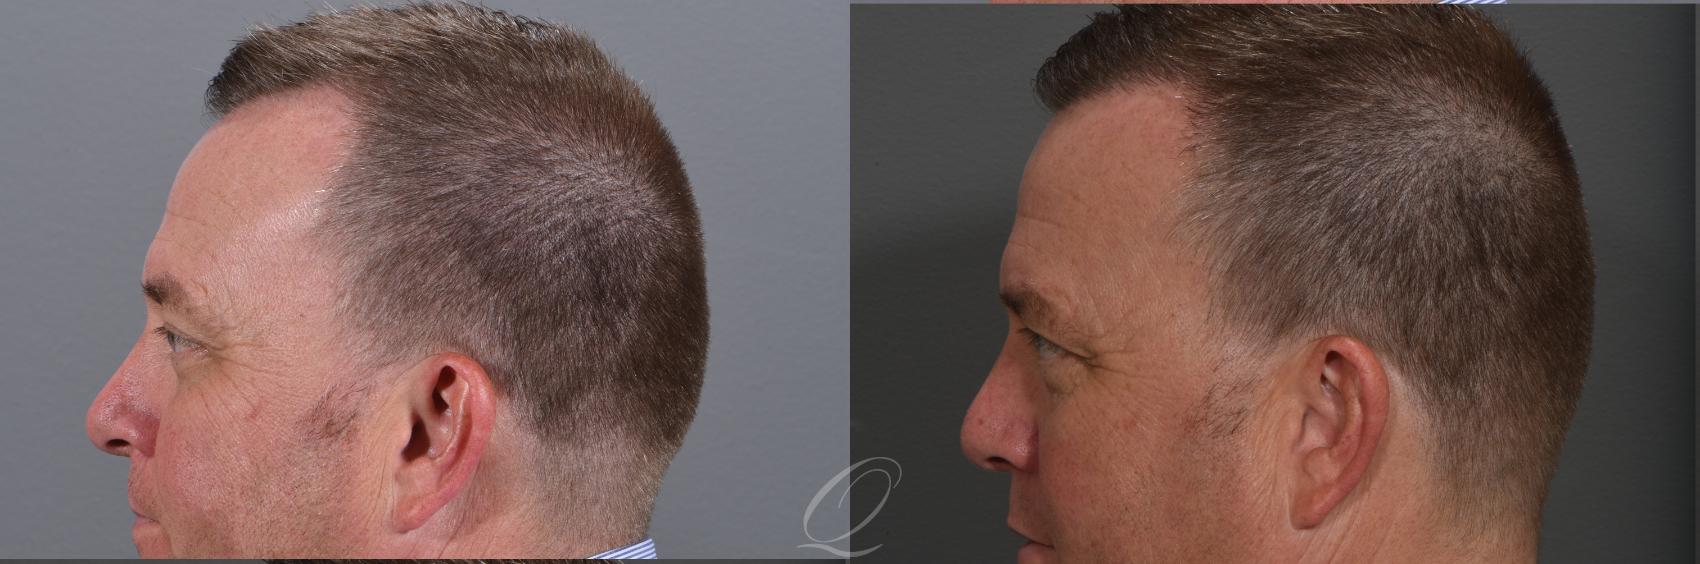 Male FUE Hair Transplant Case 1001522 Before & After Left Side | Rochester, Buffalo, & Syracuse, NY | Quatela Center for Hair Restoration